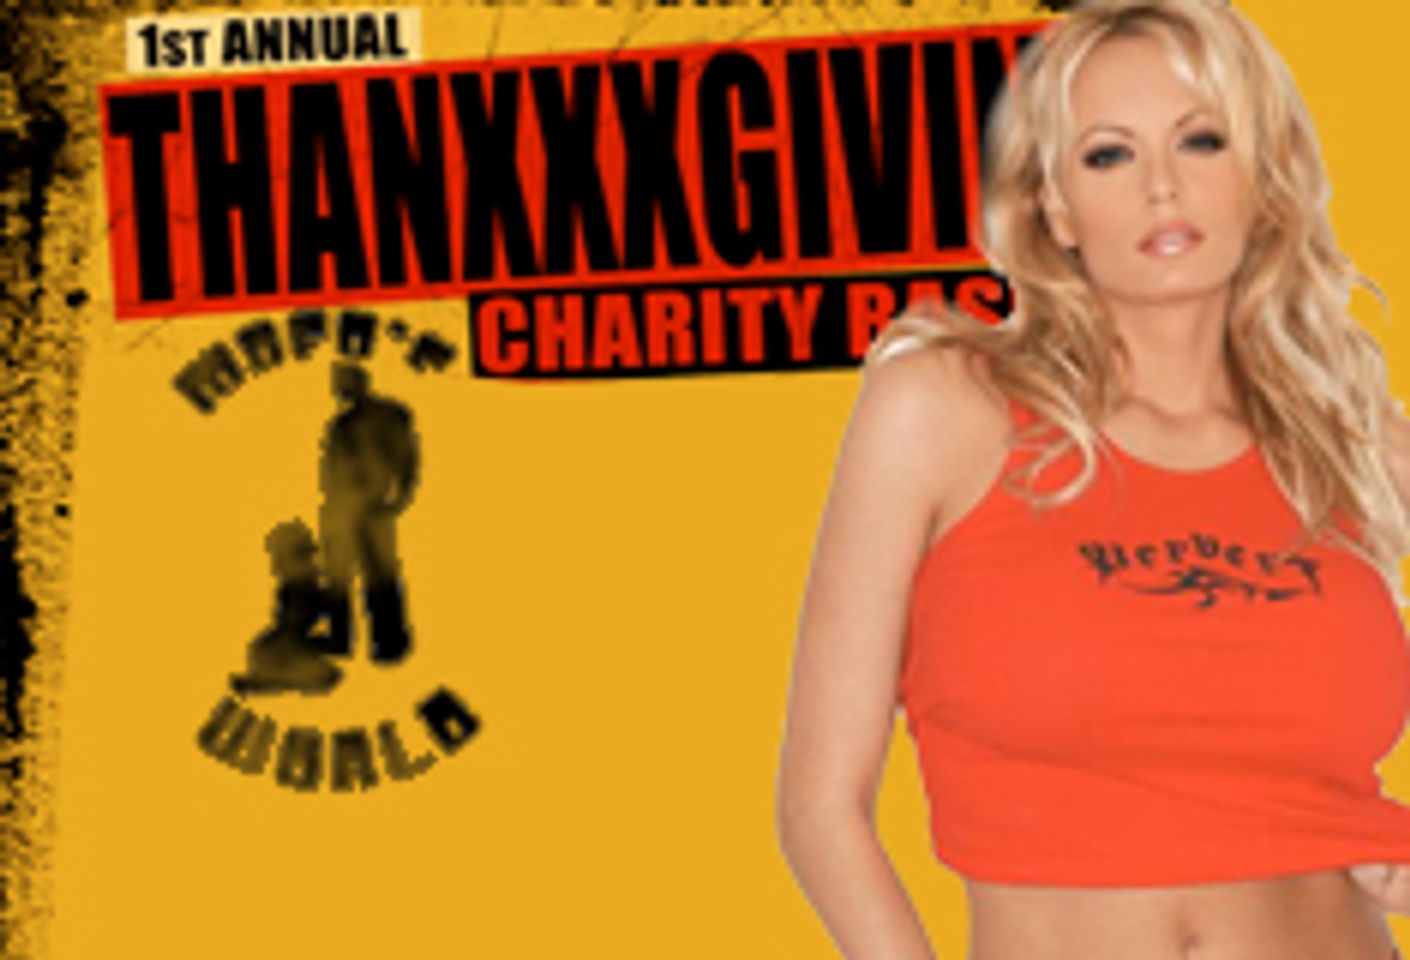 Mofo's World Throws ThanXXXgiving Charity Bash